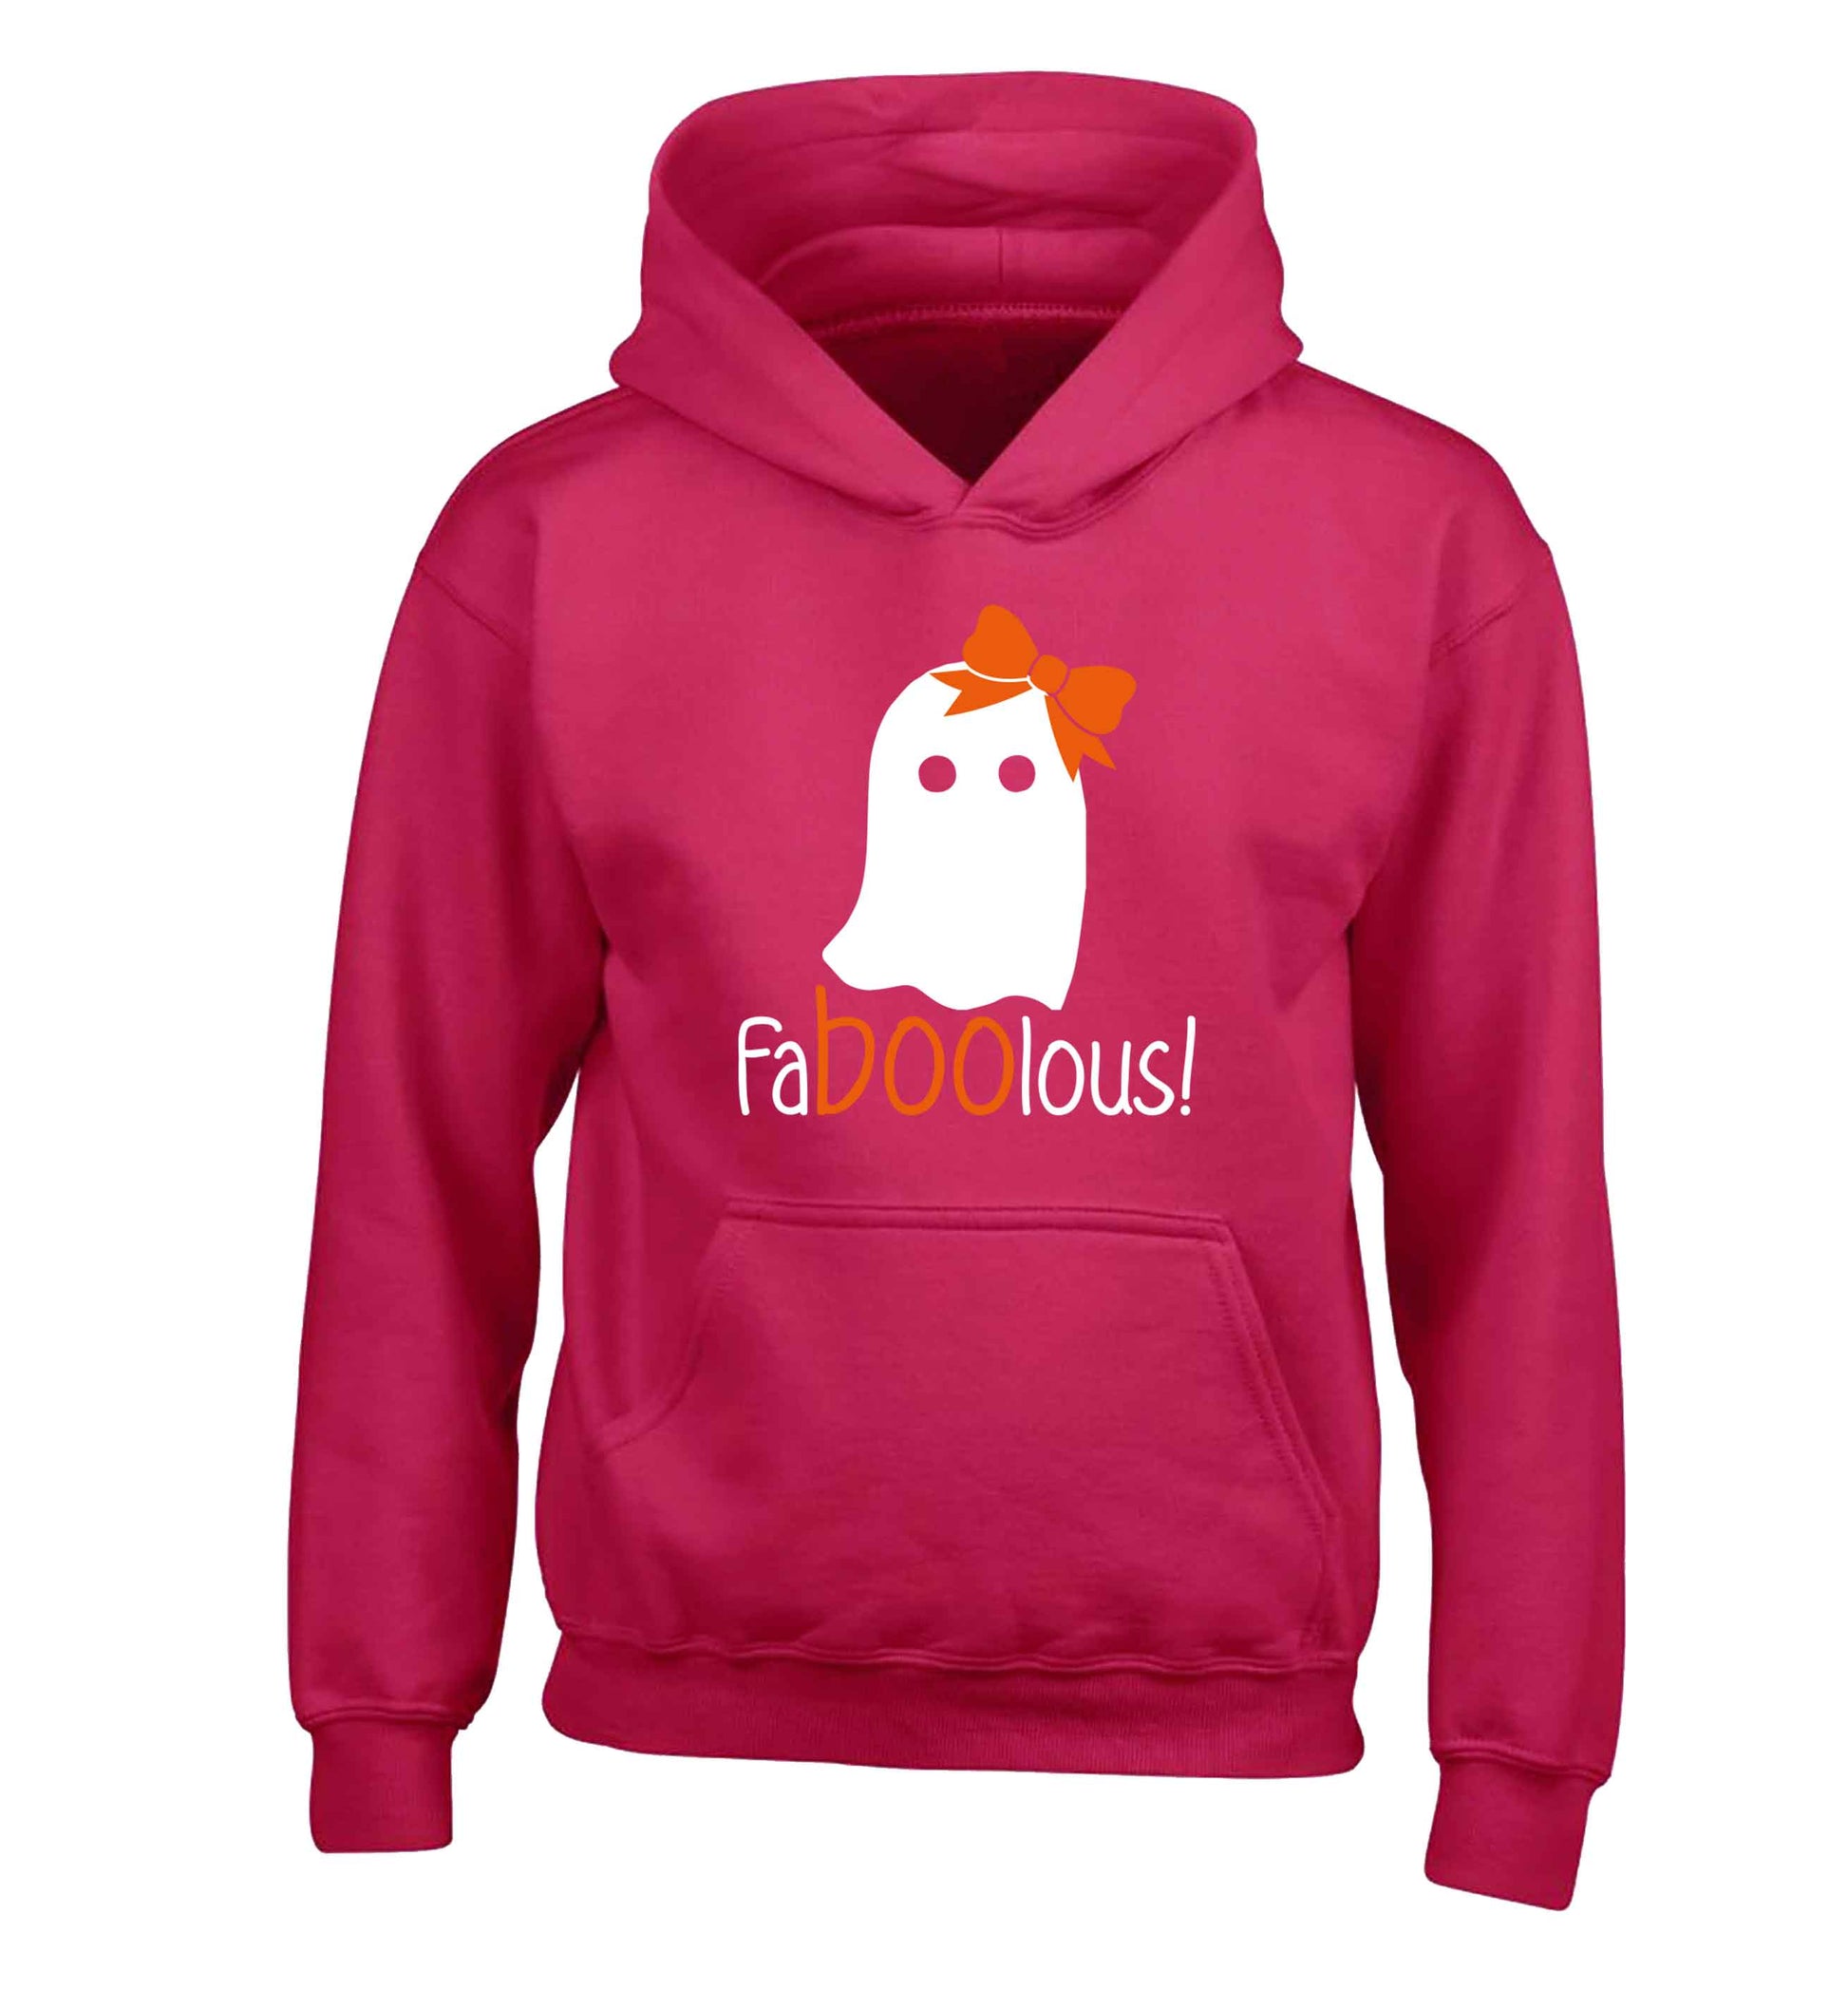 Faboolous ghost children's pink hoodie 12-13 Years